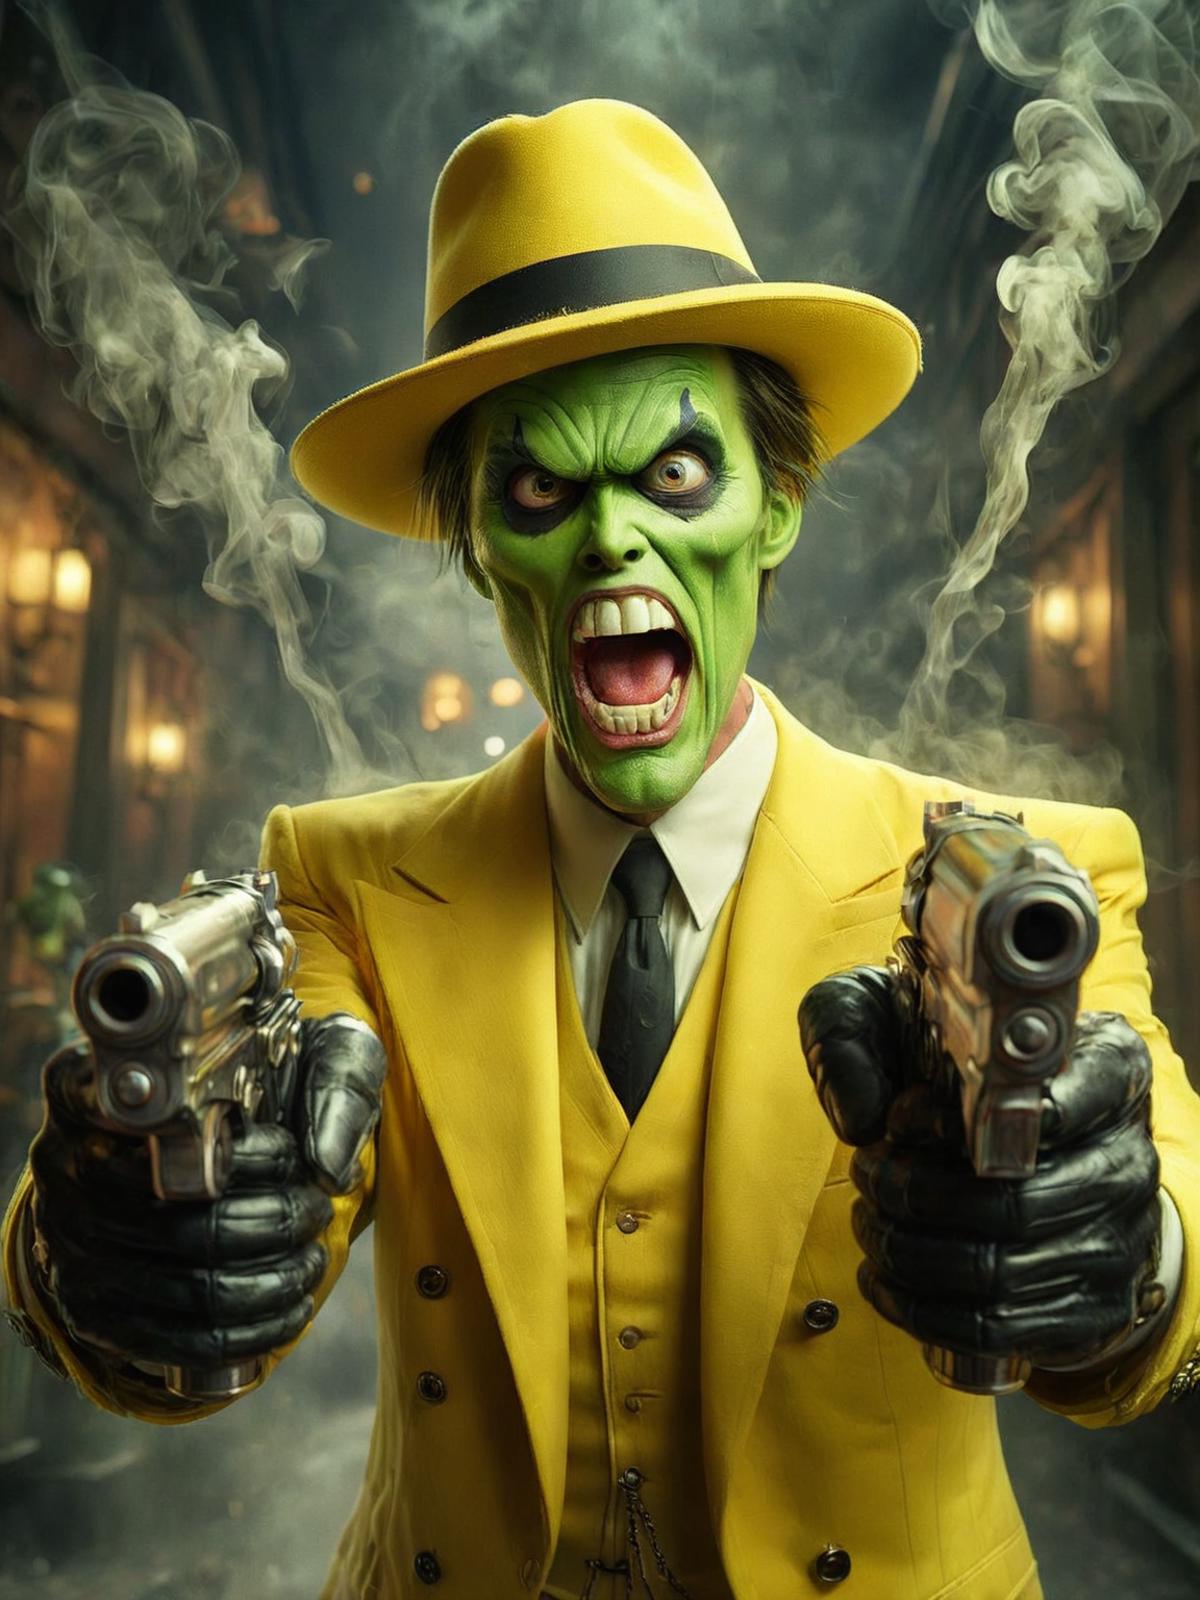 A man in a yellow suit with green makeup and holding two guns.